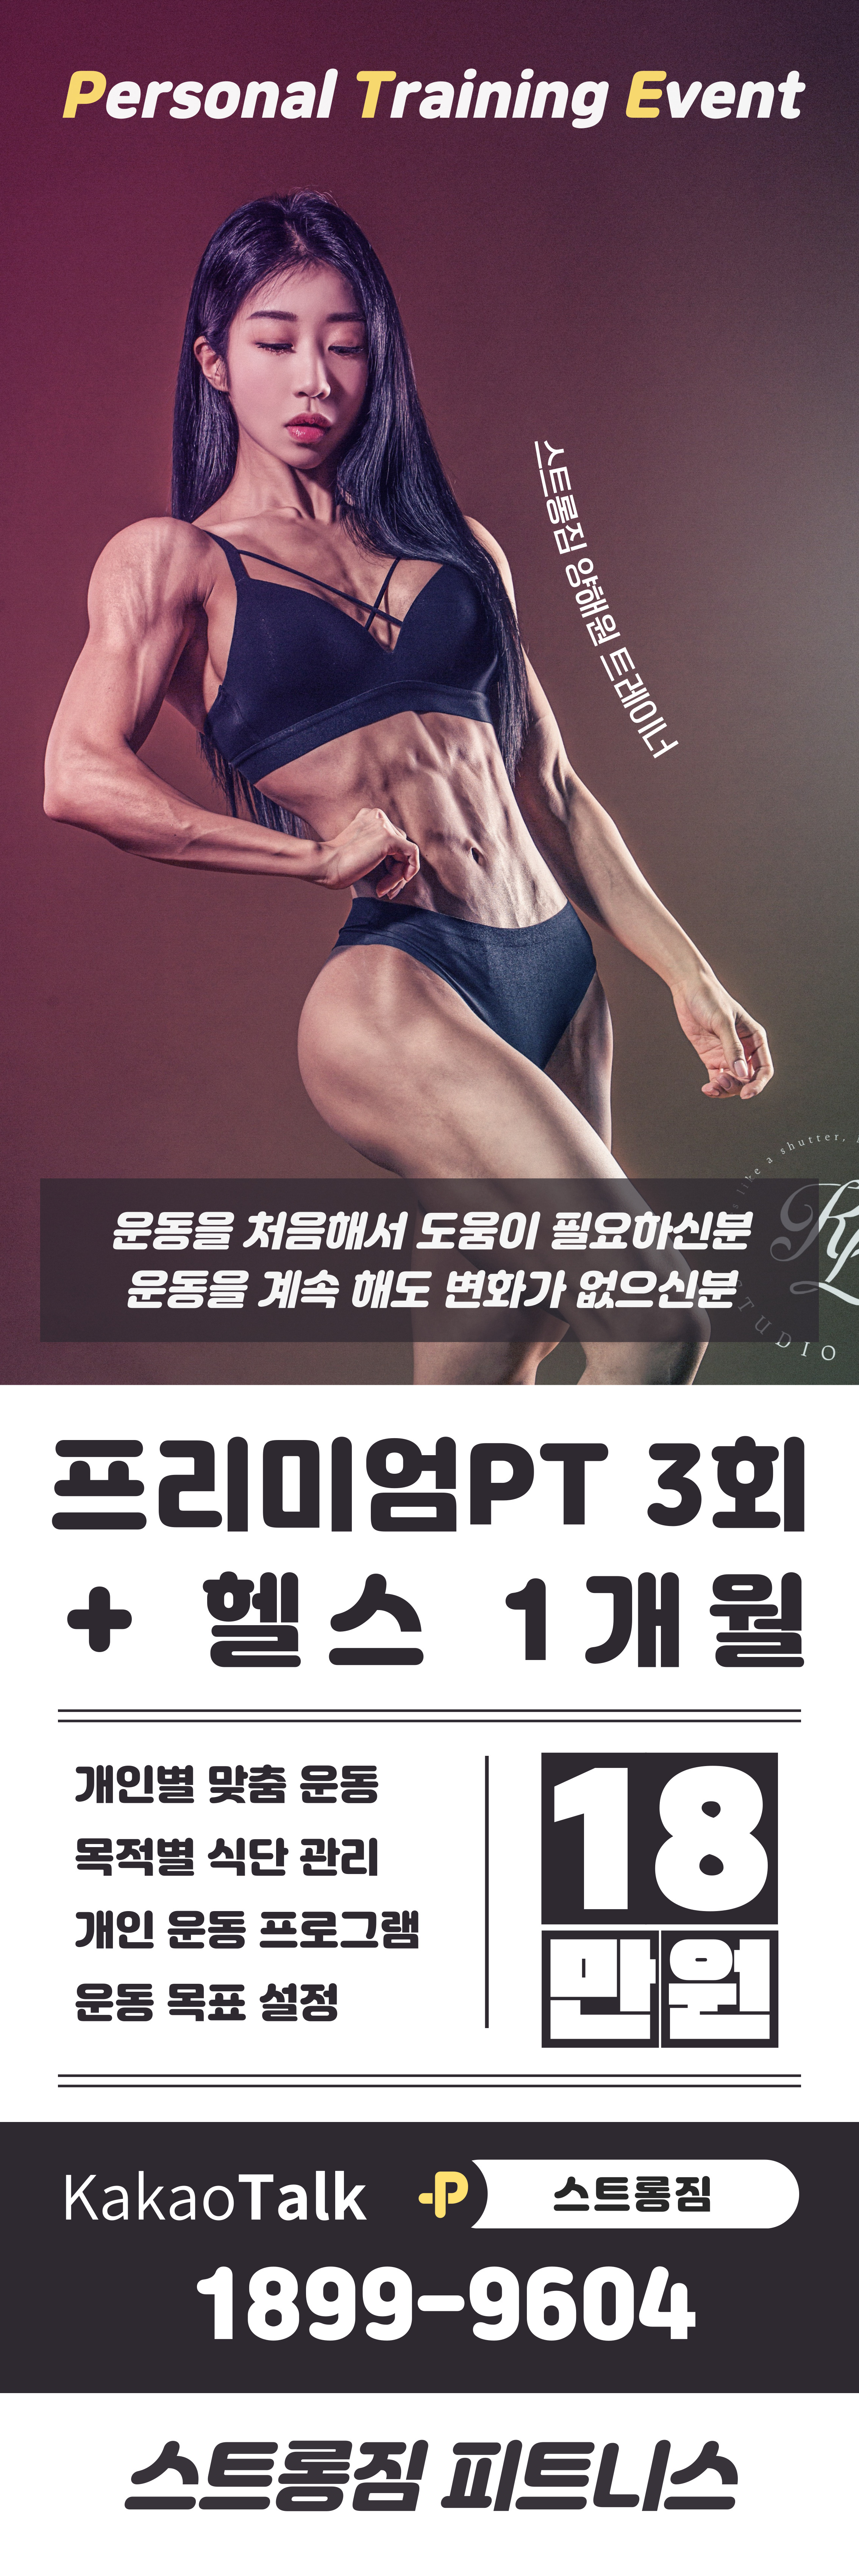 http://www.stronggym.co.kr/user/s/stronggym/editor/2311/9f78b5d414d7709843be1fd961c5ecf9_1699941790_5804.jpg 이미지크게보기